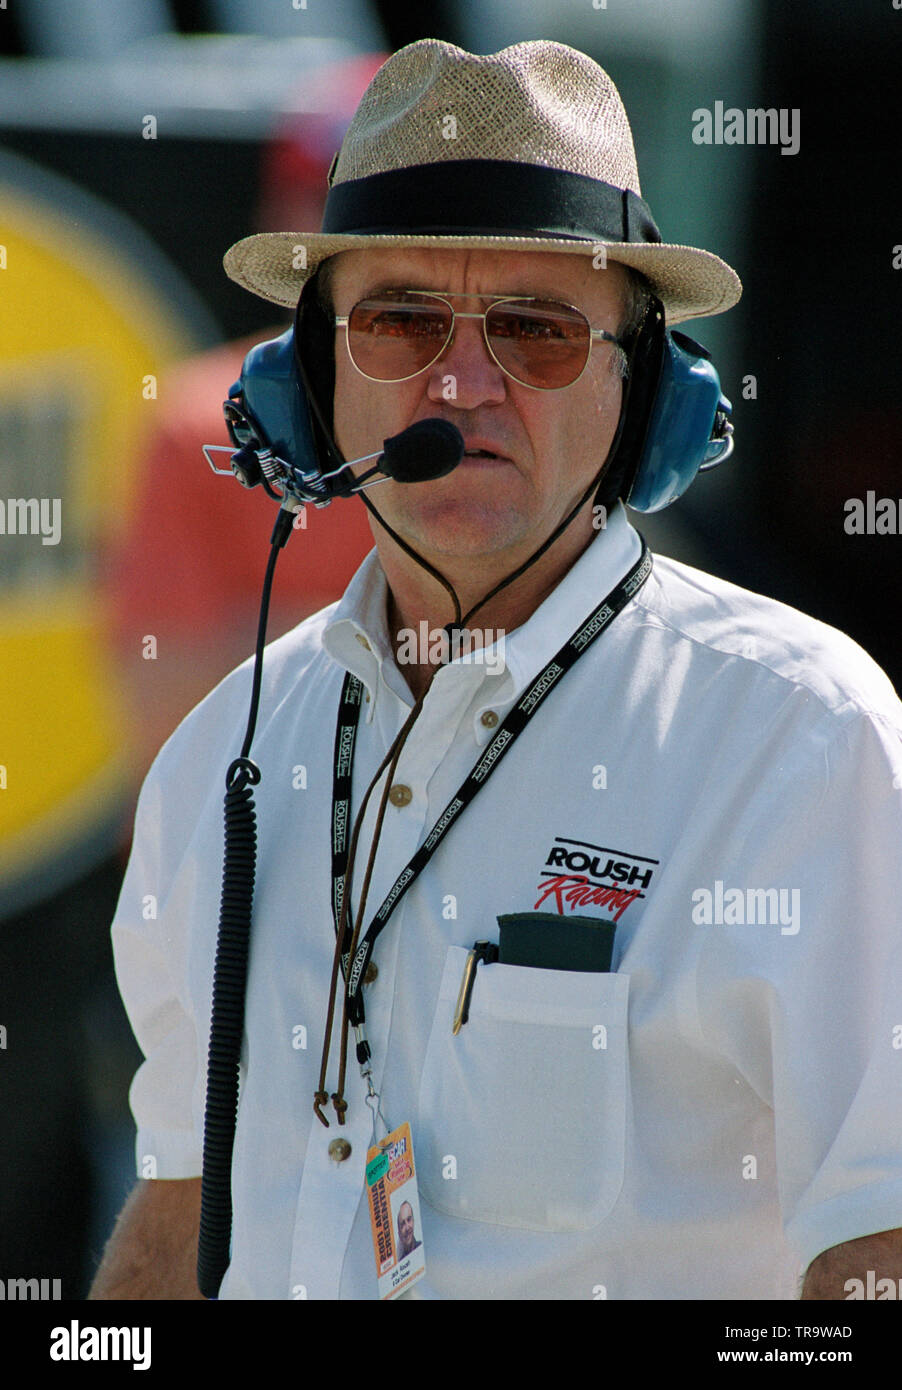 NASCAR owner Jack Roush on pit road at Homestead Miami Speedway in November 1997. Stock Photo